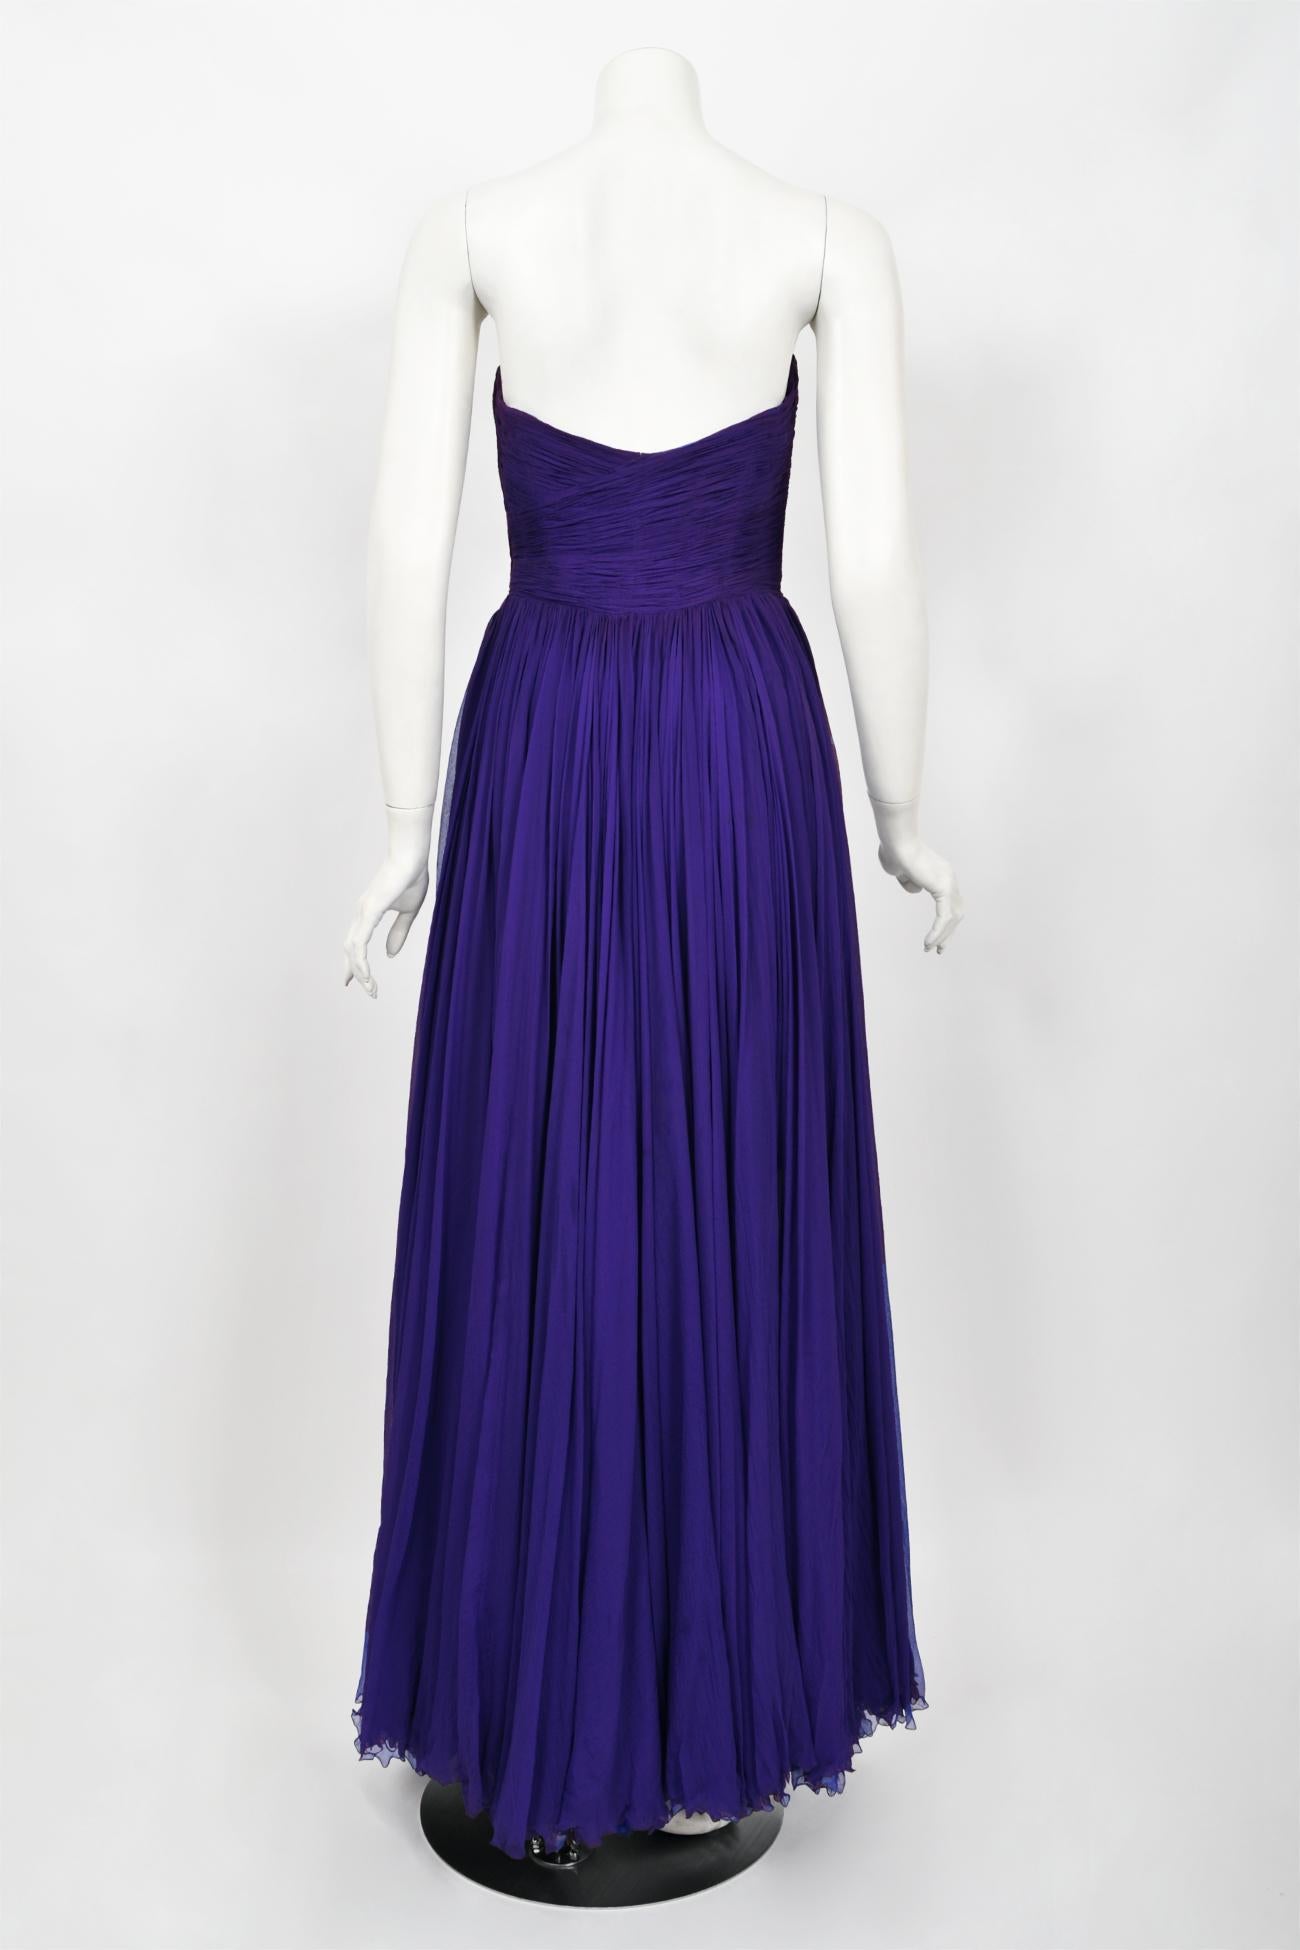 Vintage 1950s Curiel Couture Pleated Purple Silk Chiffon Strapless Goddess Gown  For Sale 11